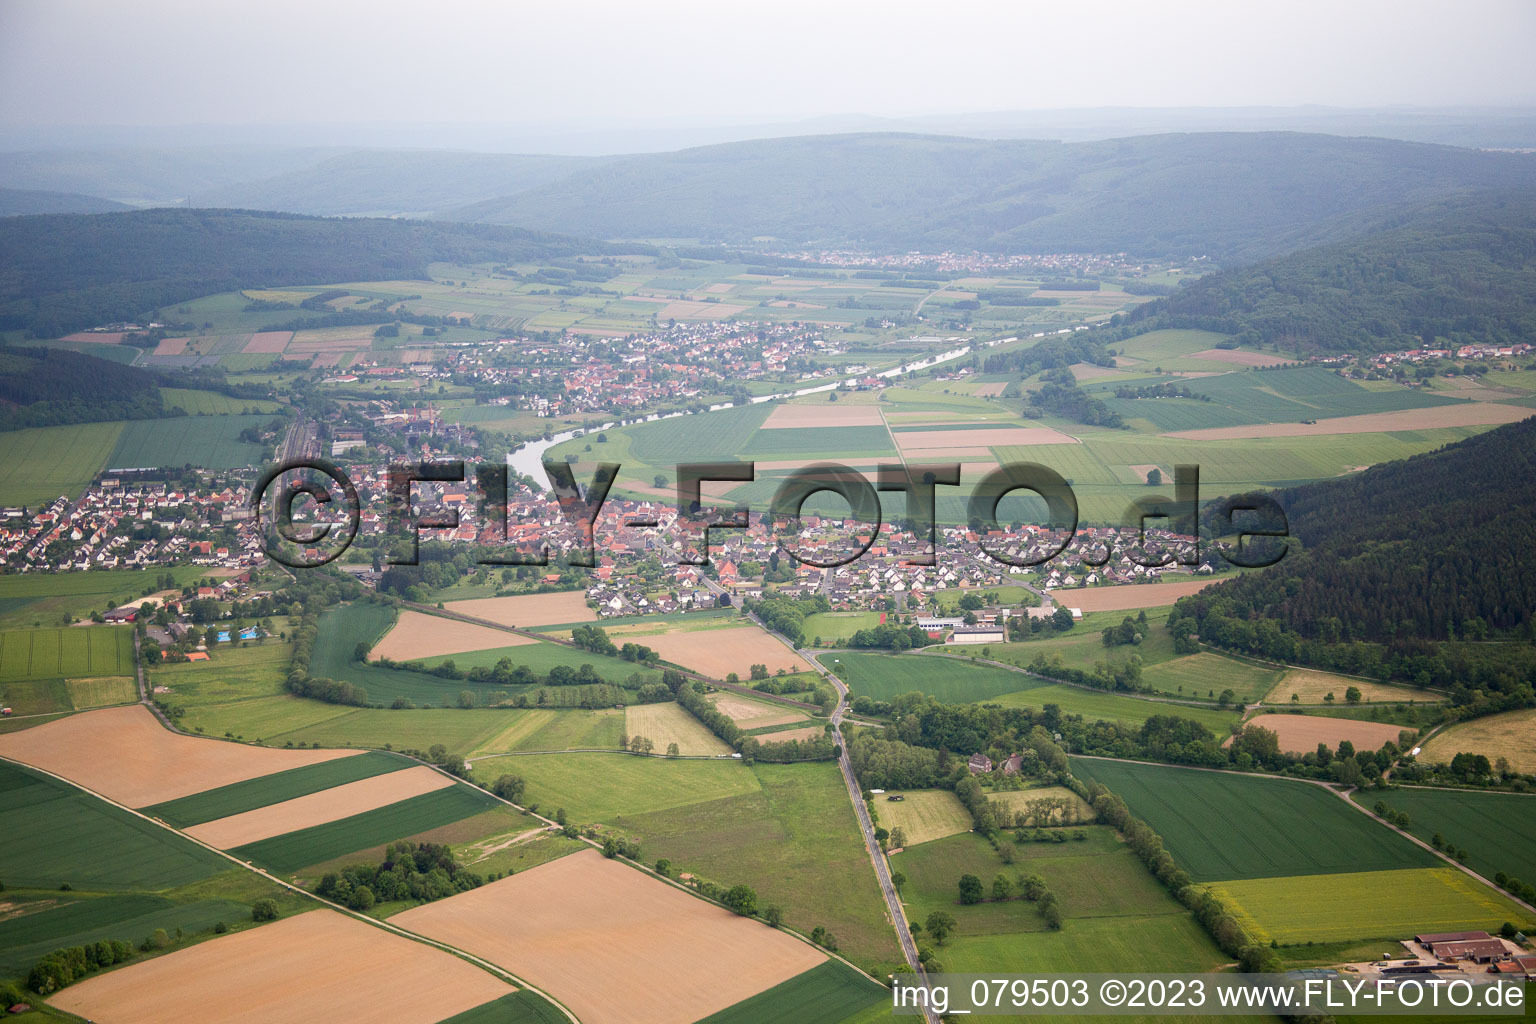 Aerial view of Bodenfelde in the state Lower Saxony, Germany